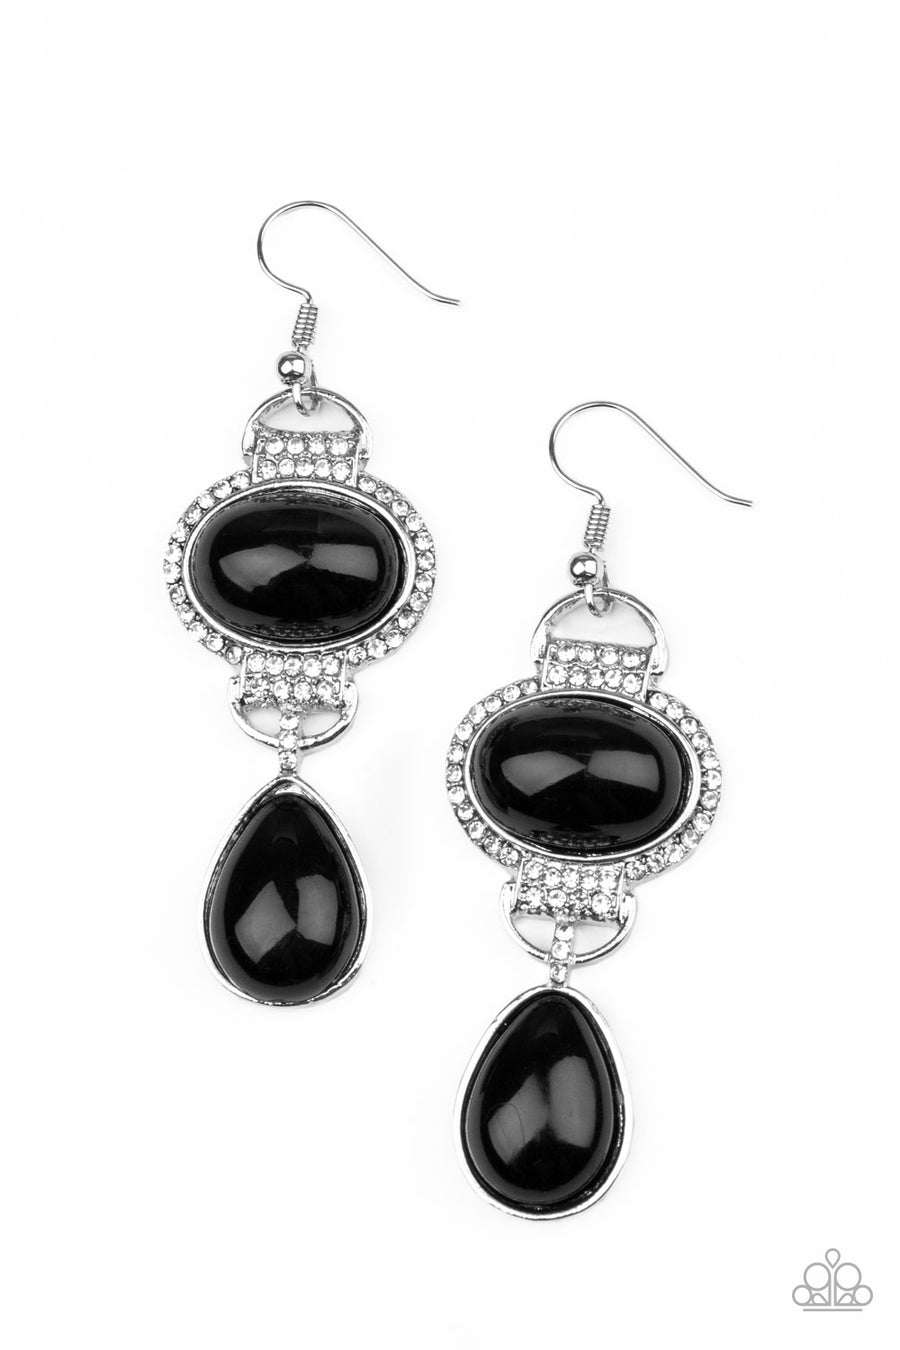 Icy Shimmer - Black Rhinestone Earrings - Paparazzi Accessories